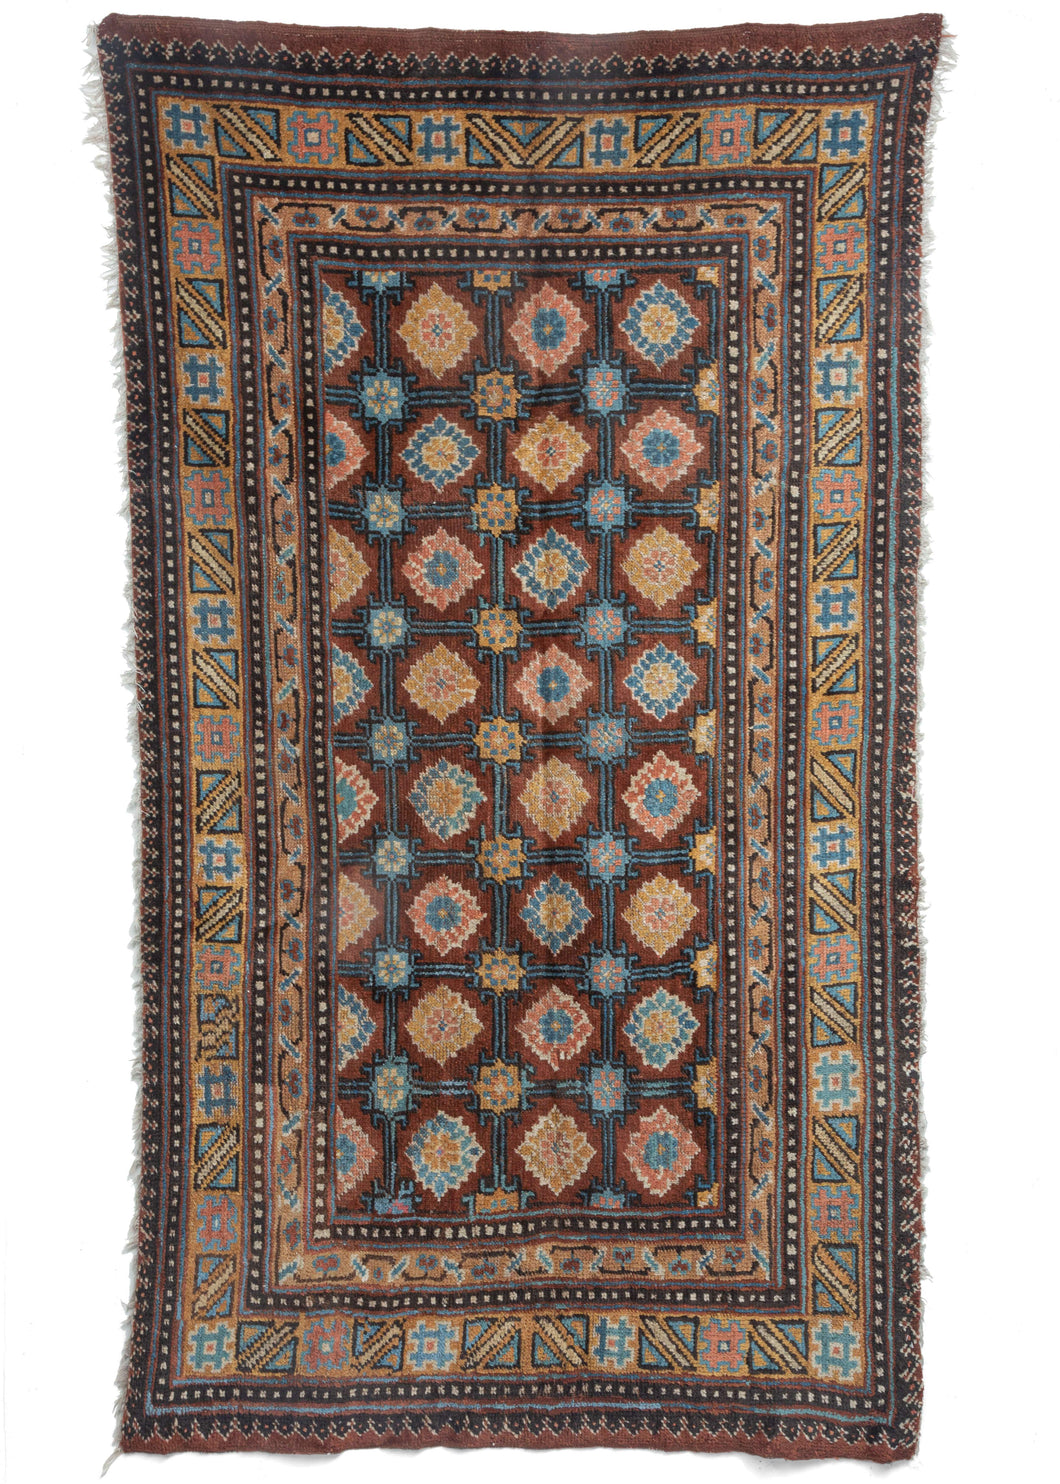 Antique Gansu woven Tibetan meditation nmat with an allover design of pinnk yello wand blue flowers in a grid of brown field, also with a yellow border with hashtag graphics